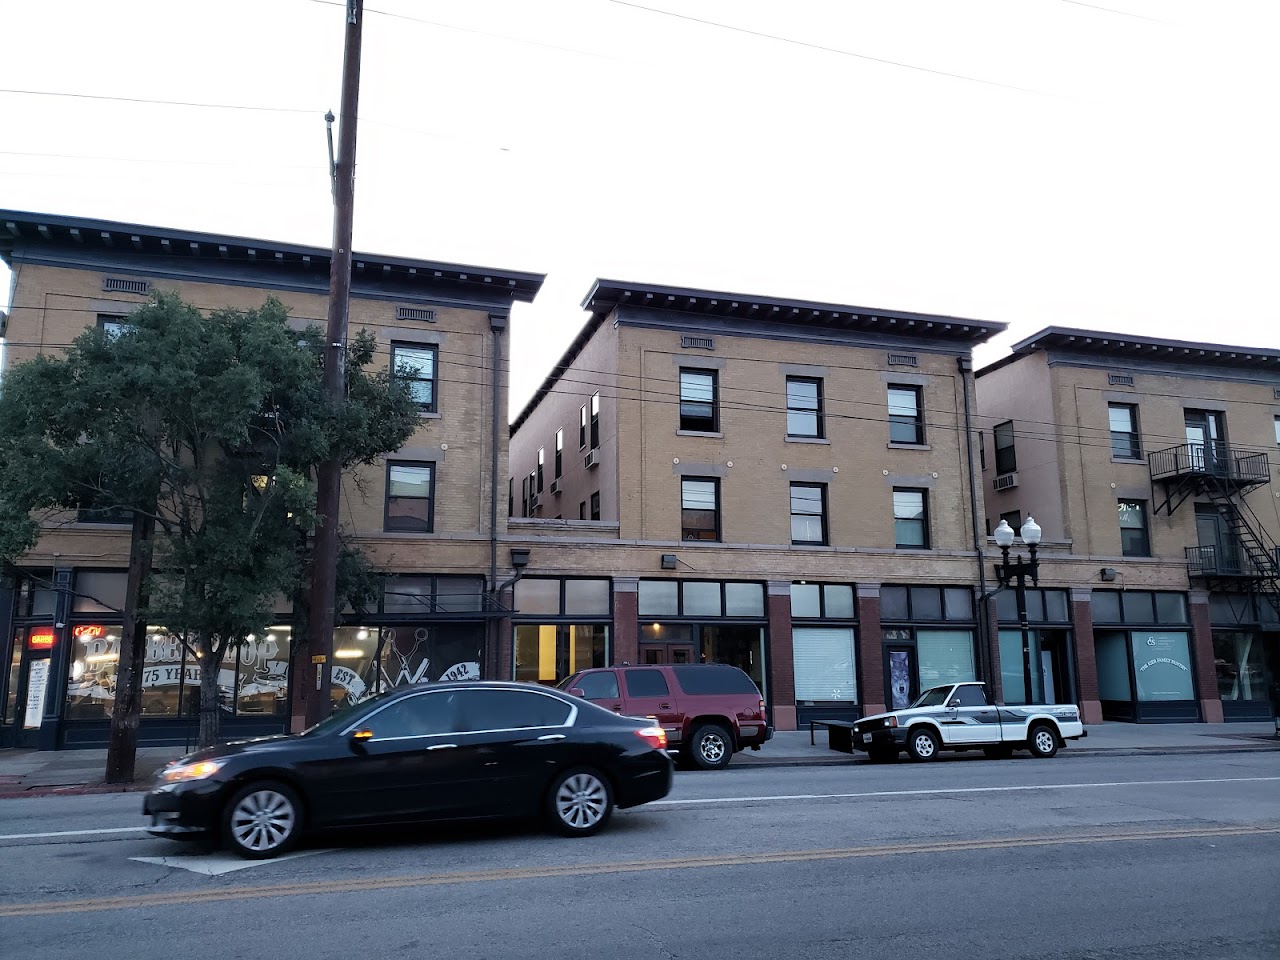 Photo of MARION HOTEL. Affordable housing located at 184 25TH STREET OGDEN, UT 84401